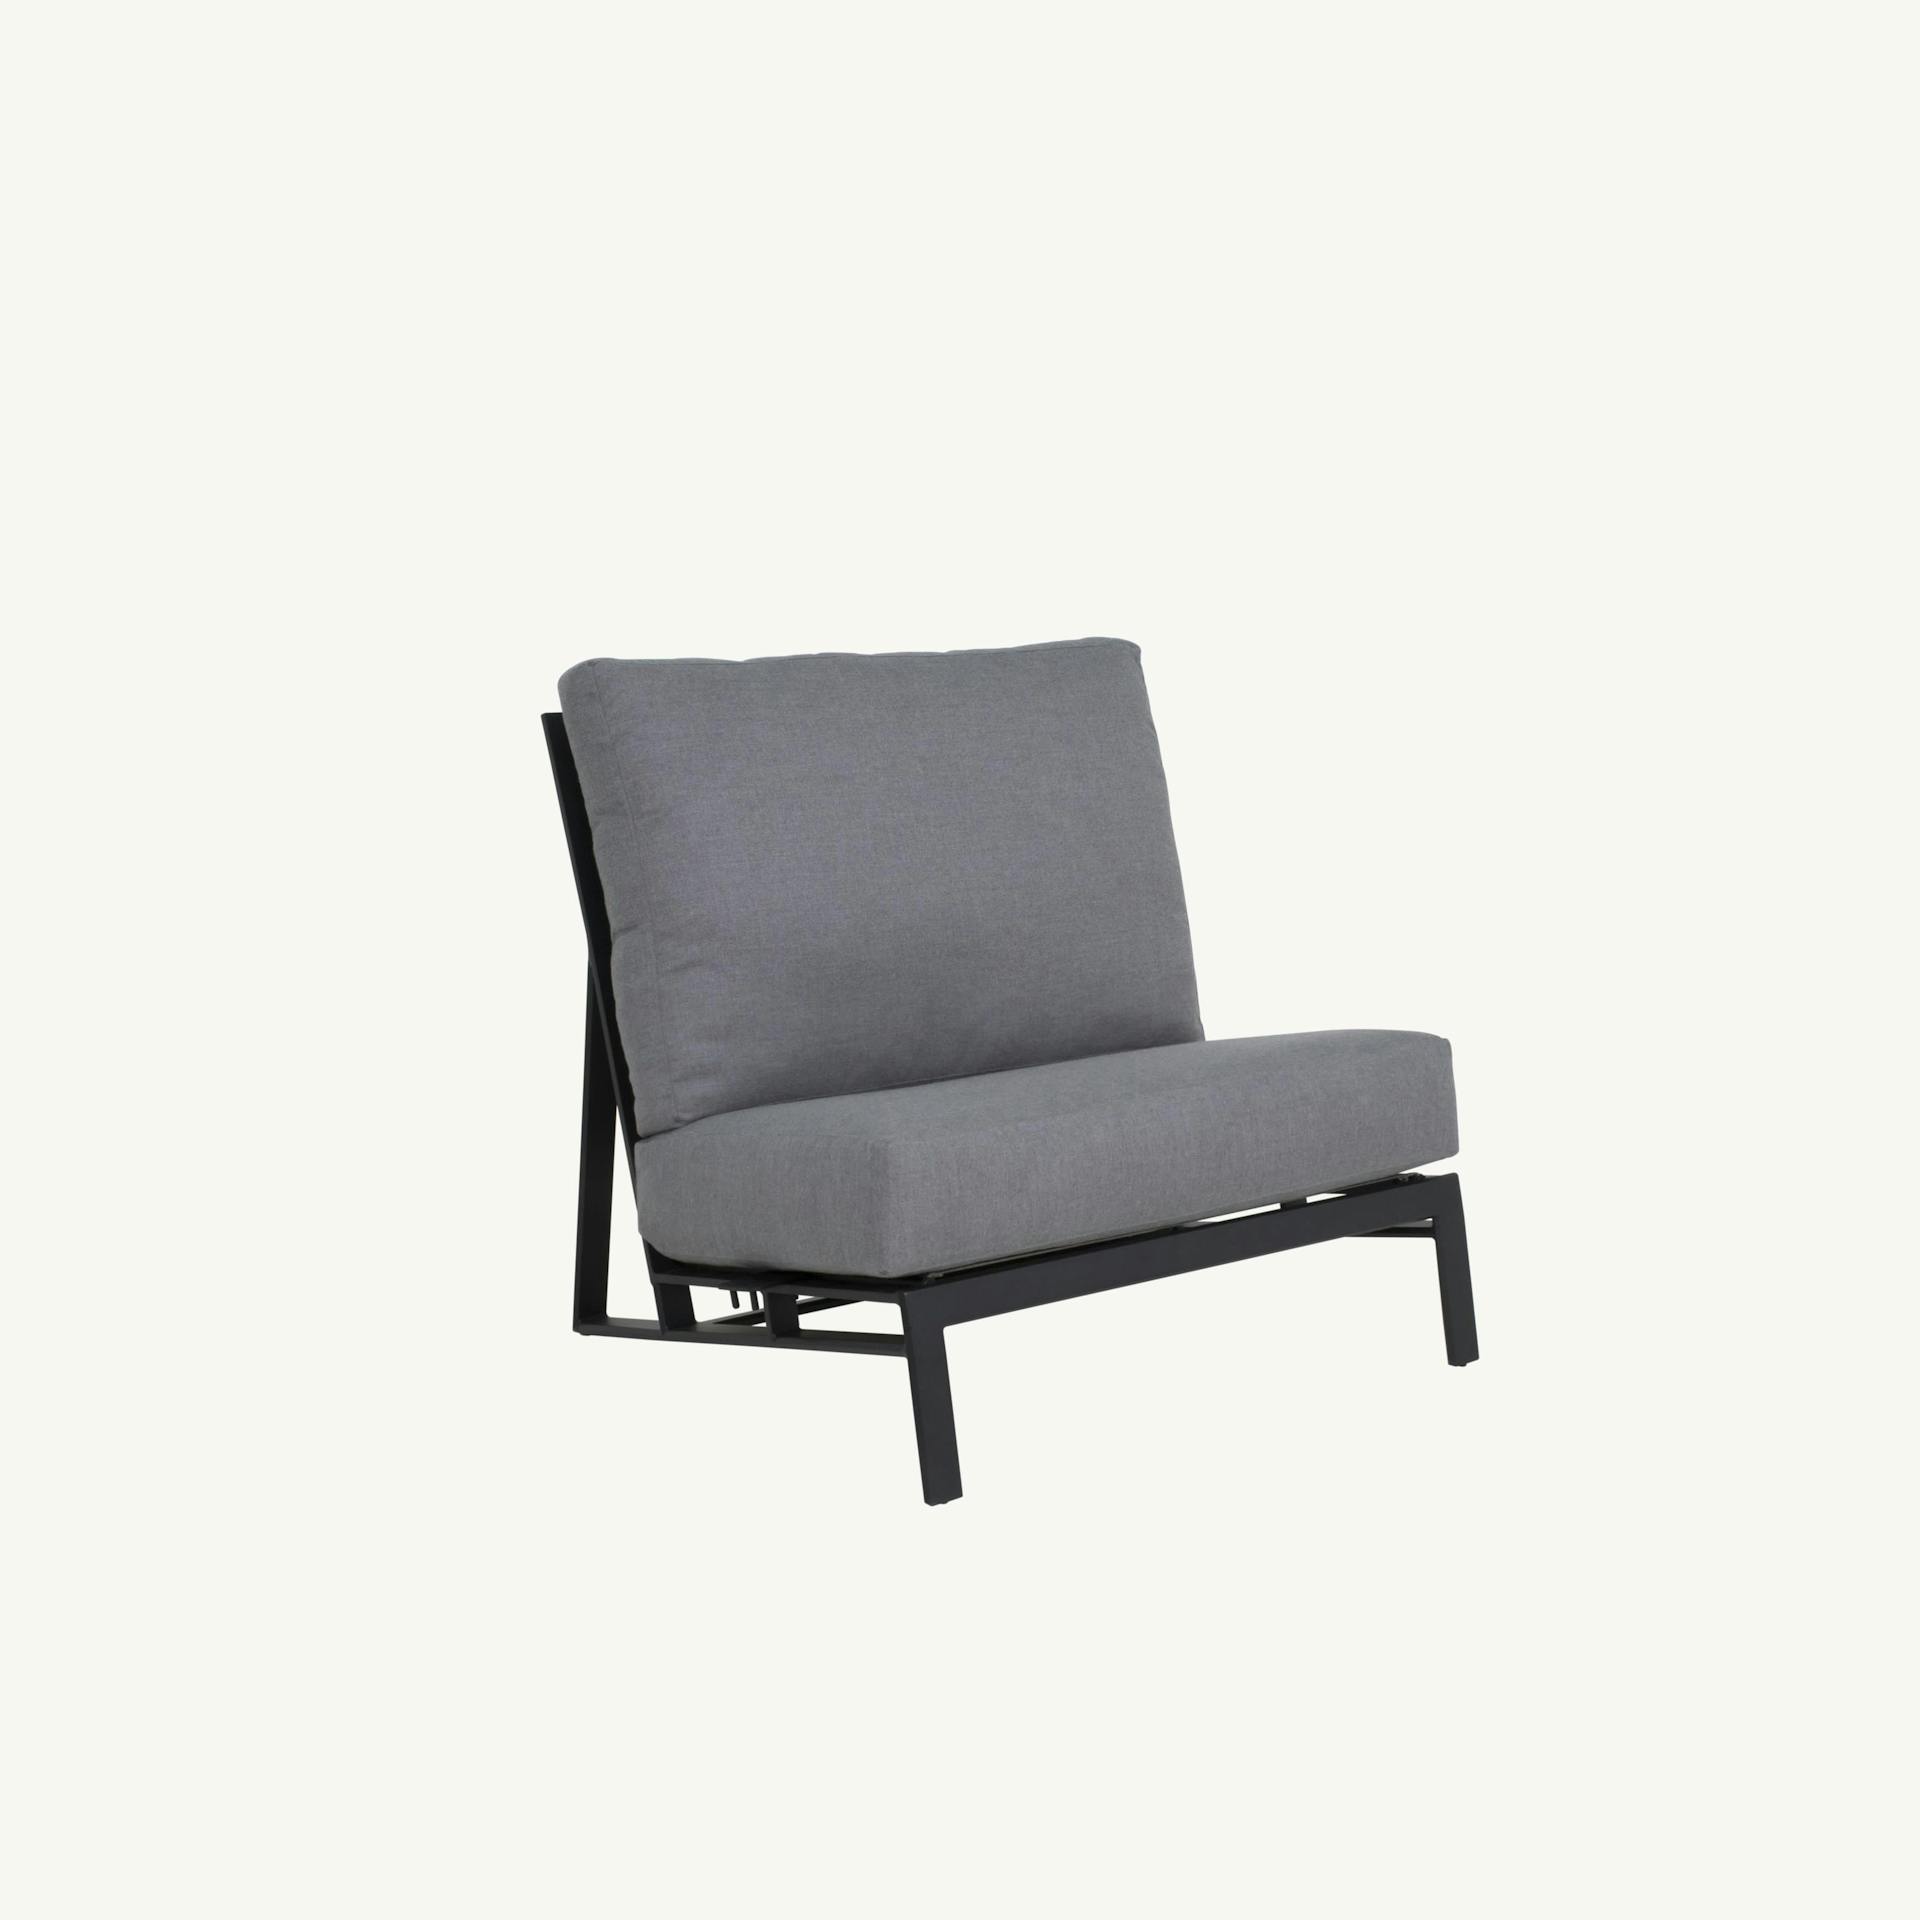 Prism Sectional Armless Lounge Unit